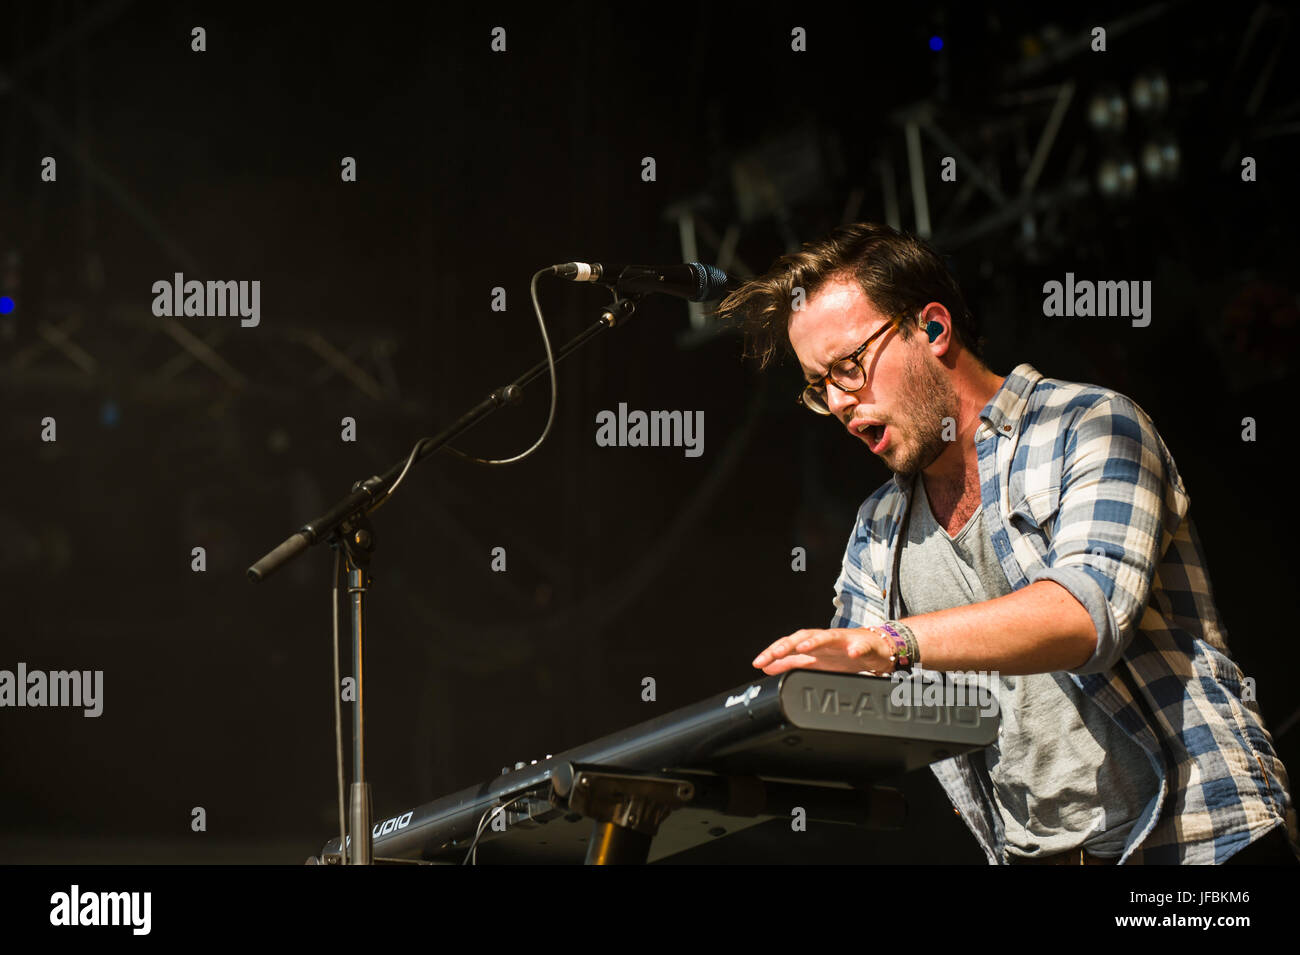 Dundrennan Scotland, UK - July 25, 2014: Stewart Brock of Glasgow synthpop band Prides performs at the 13th Wickerman Festival Stock Photo